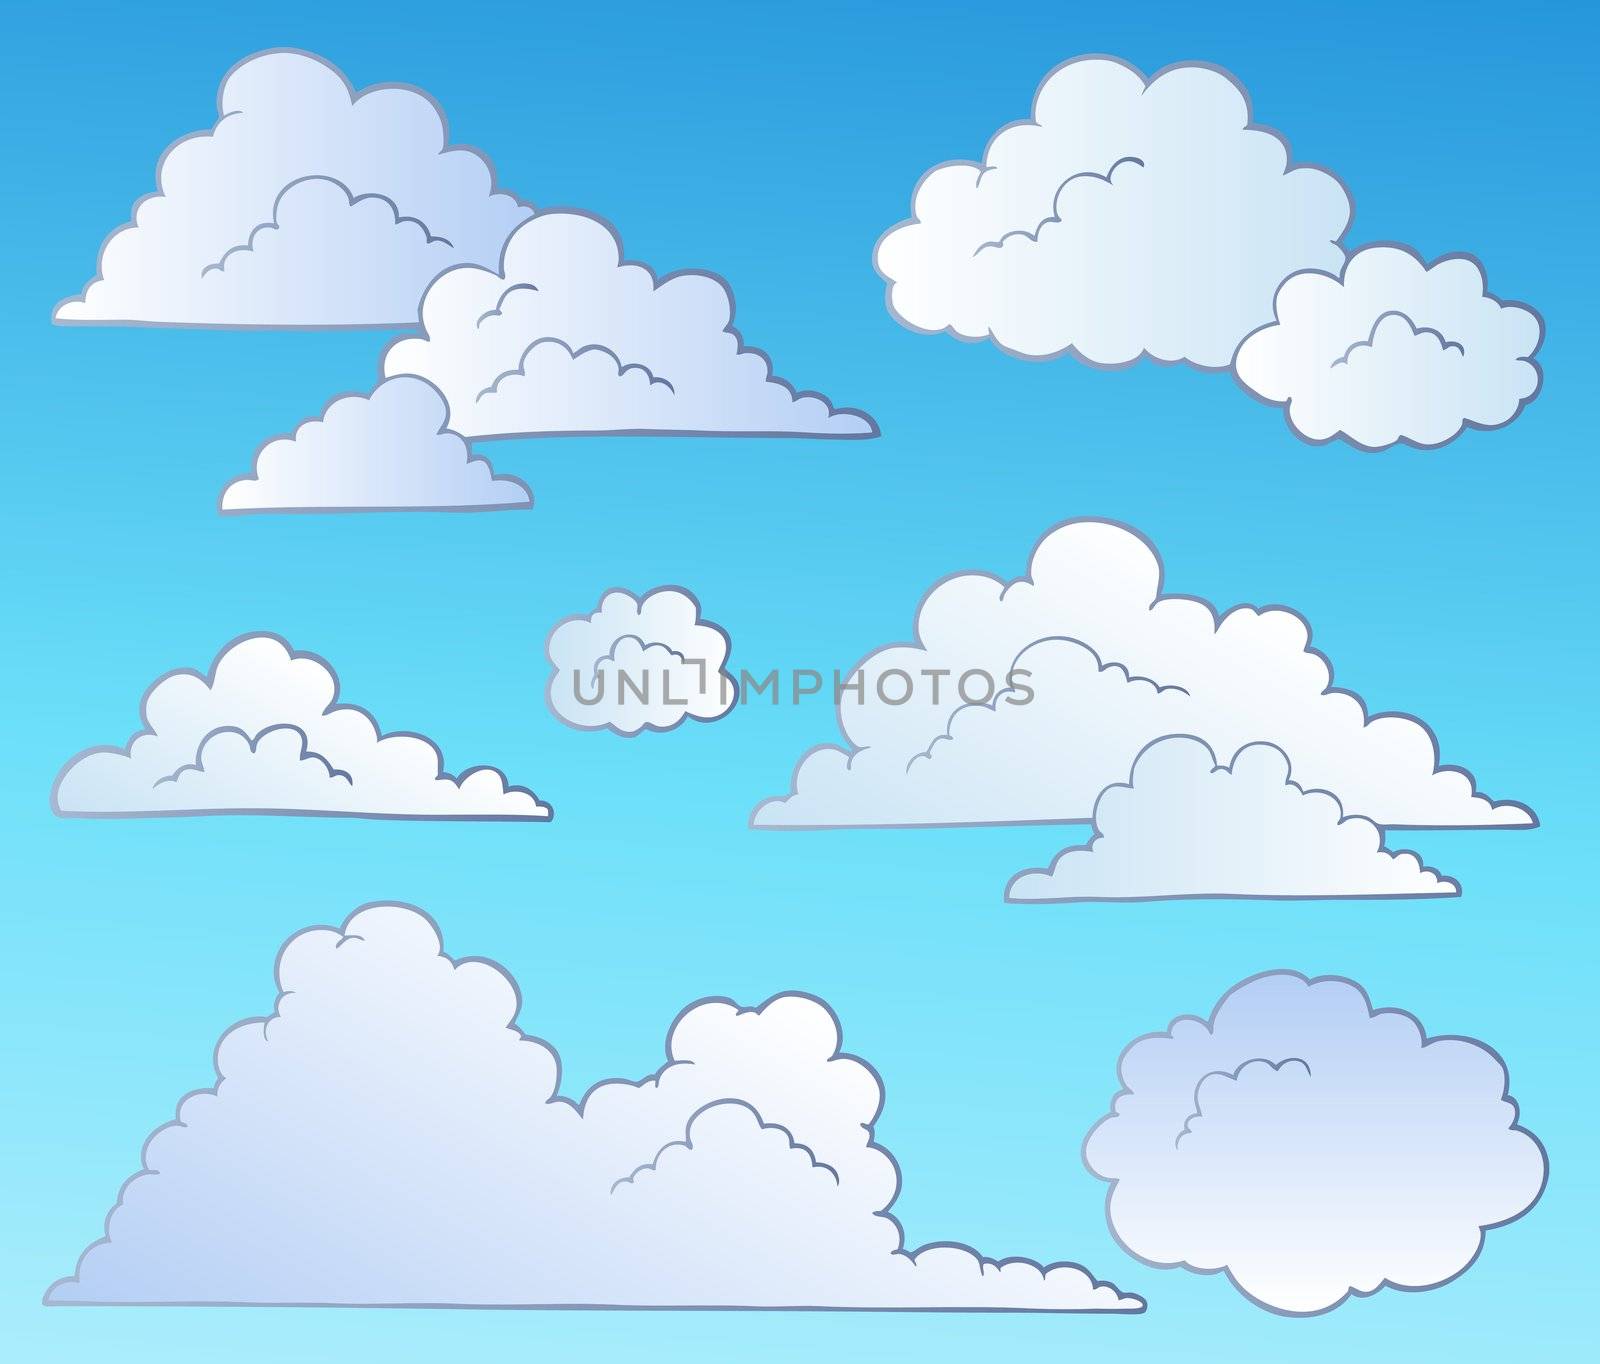 Cartoon clouds collection - vector illustration.